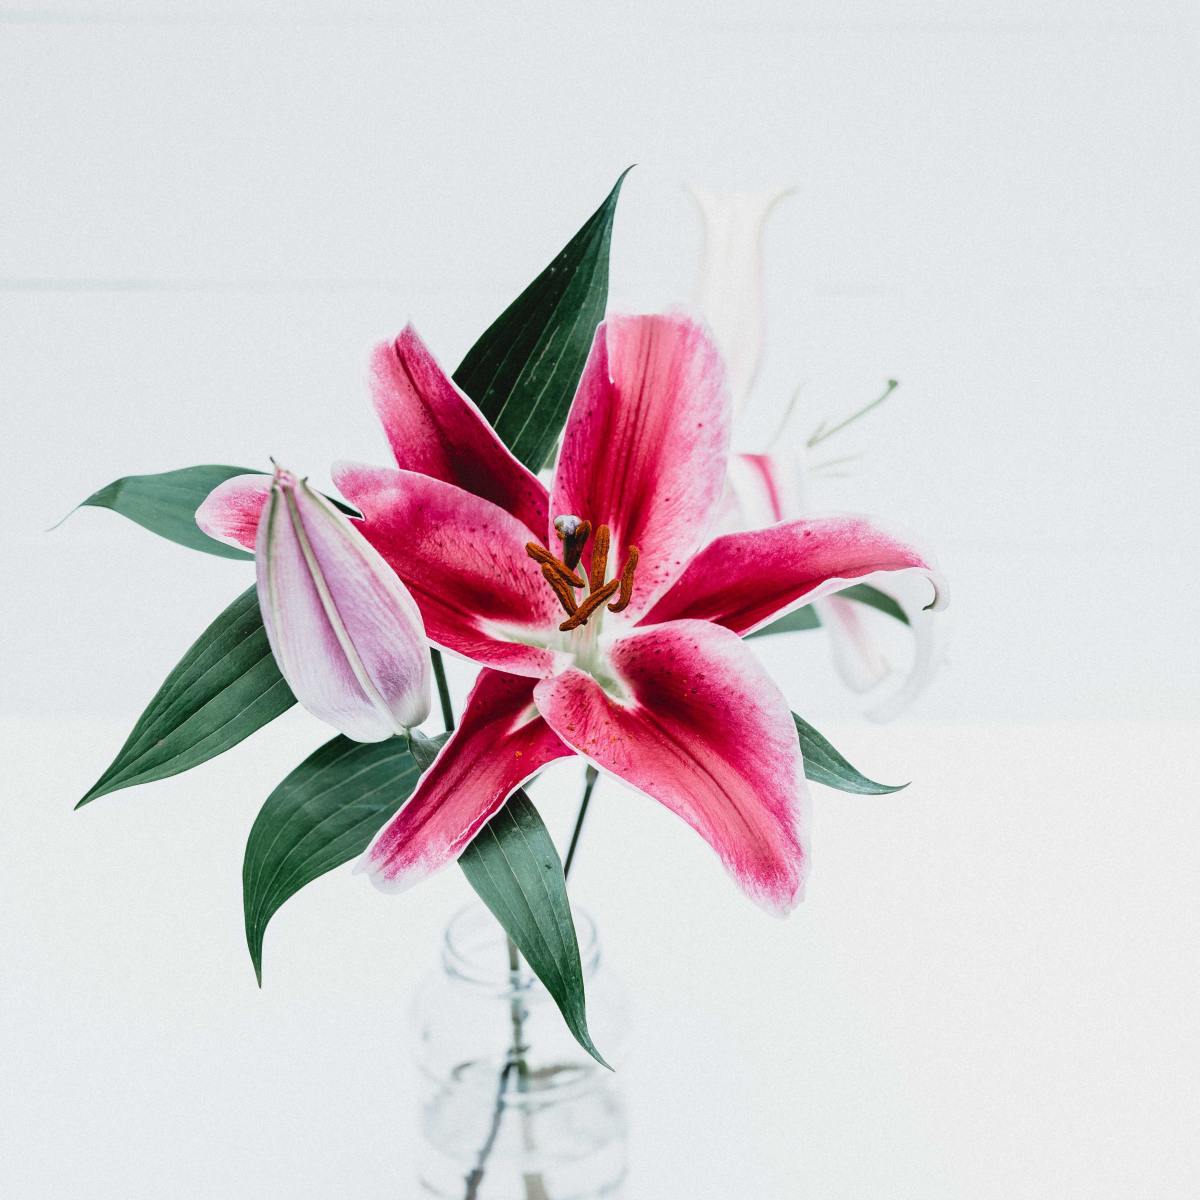 Lillies can last in vases when properly cared for.